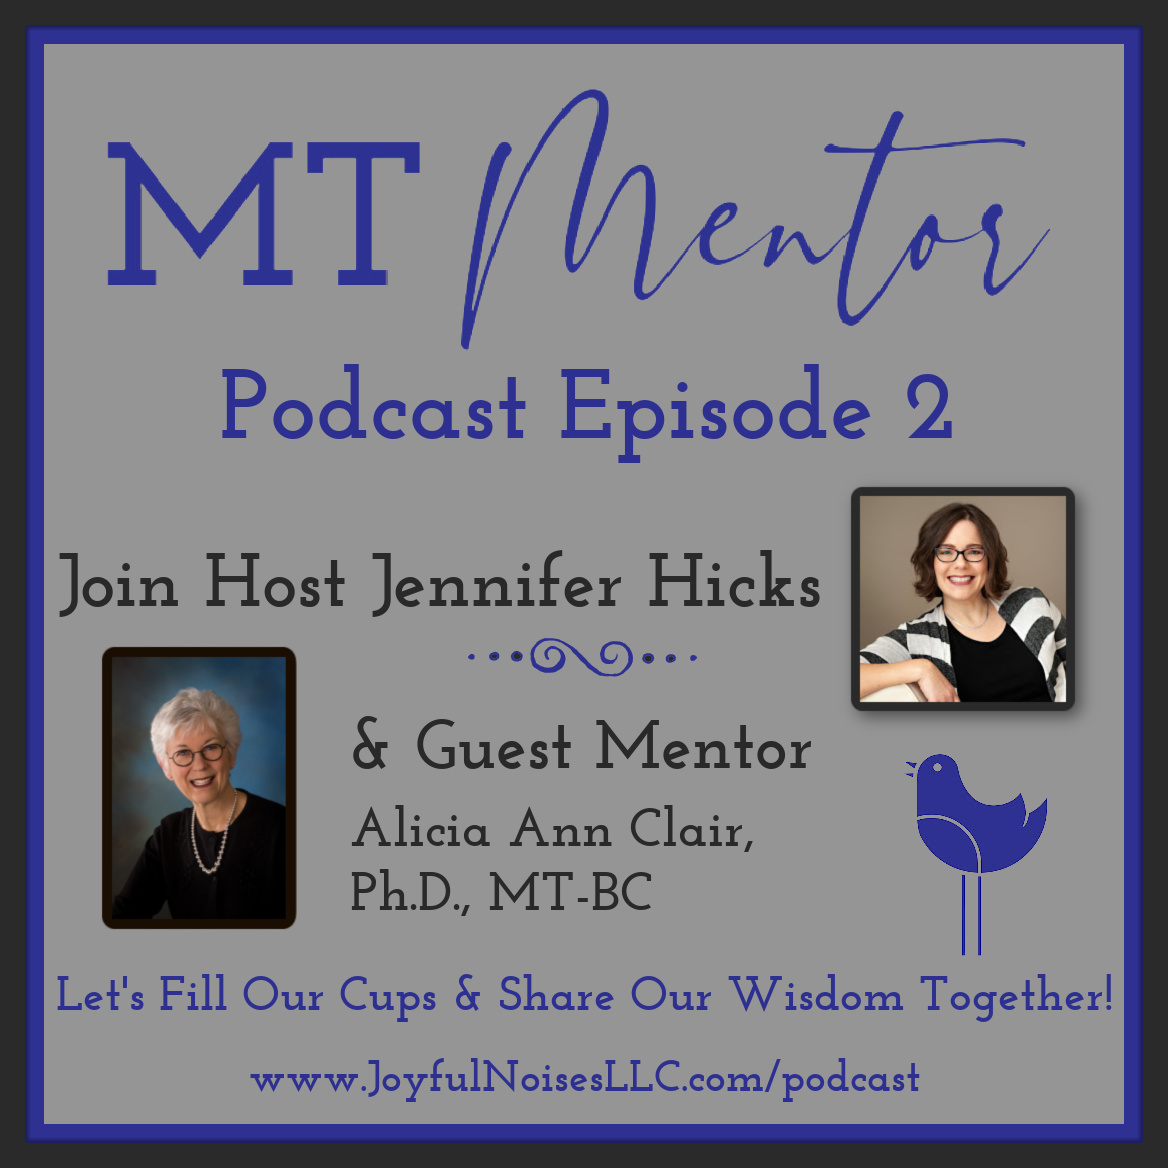 MT Mentor Podcast Episode 2 with headshots of host Jennifer Hicks and guest mentor Alicia Ann Clair, PhD, MT-BC